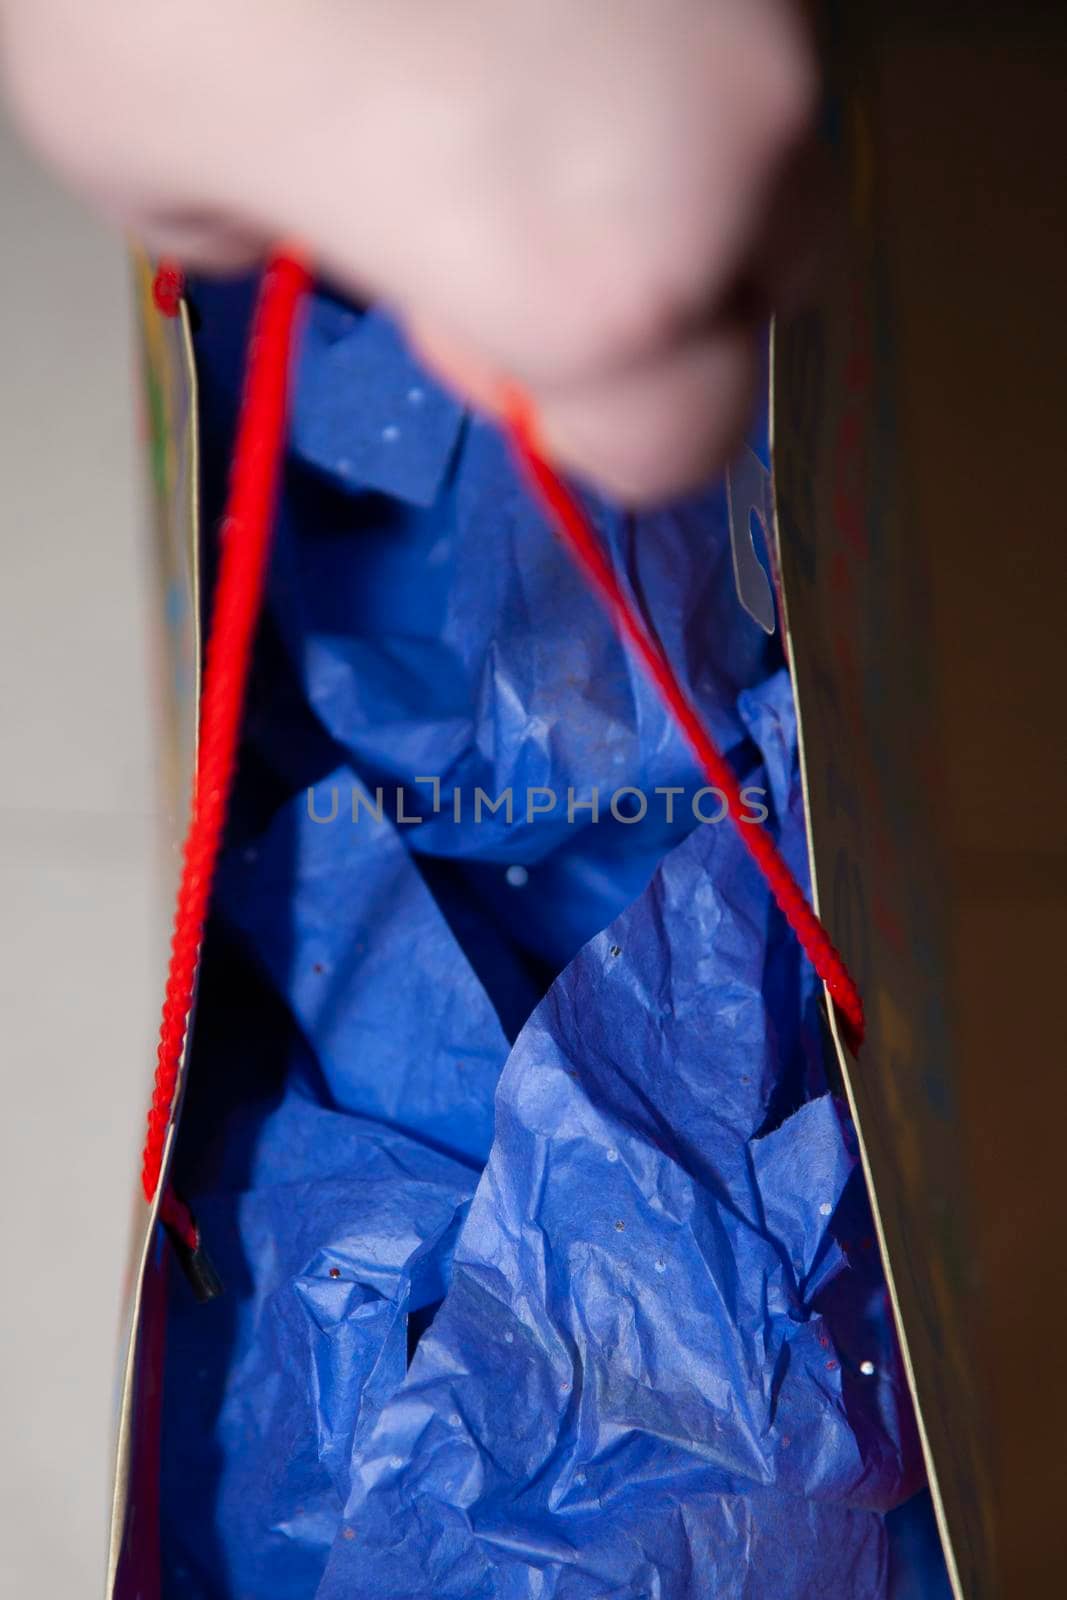 Woman's hand holding a gift bag filled with blue packing paper